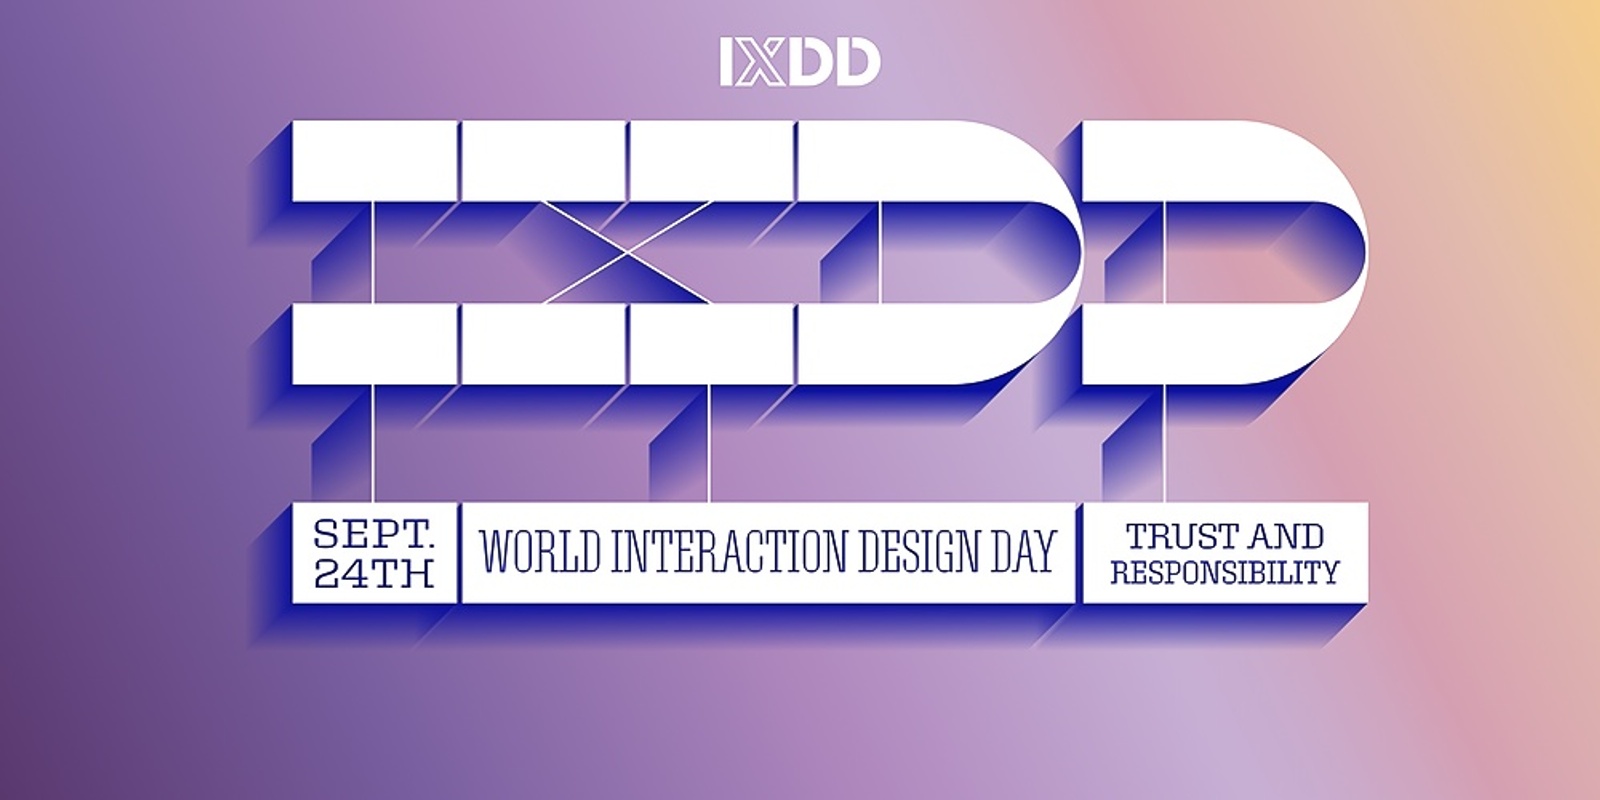 Banner image for Ethical Design, Trust & Responsibility for World Interaction Design Day (IxDD)